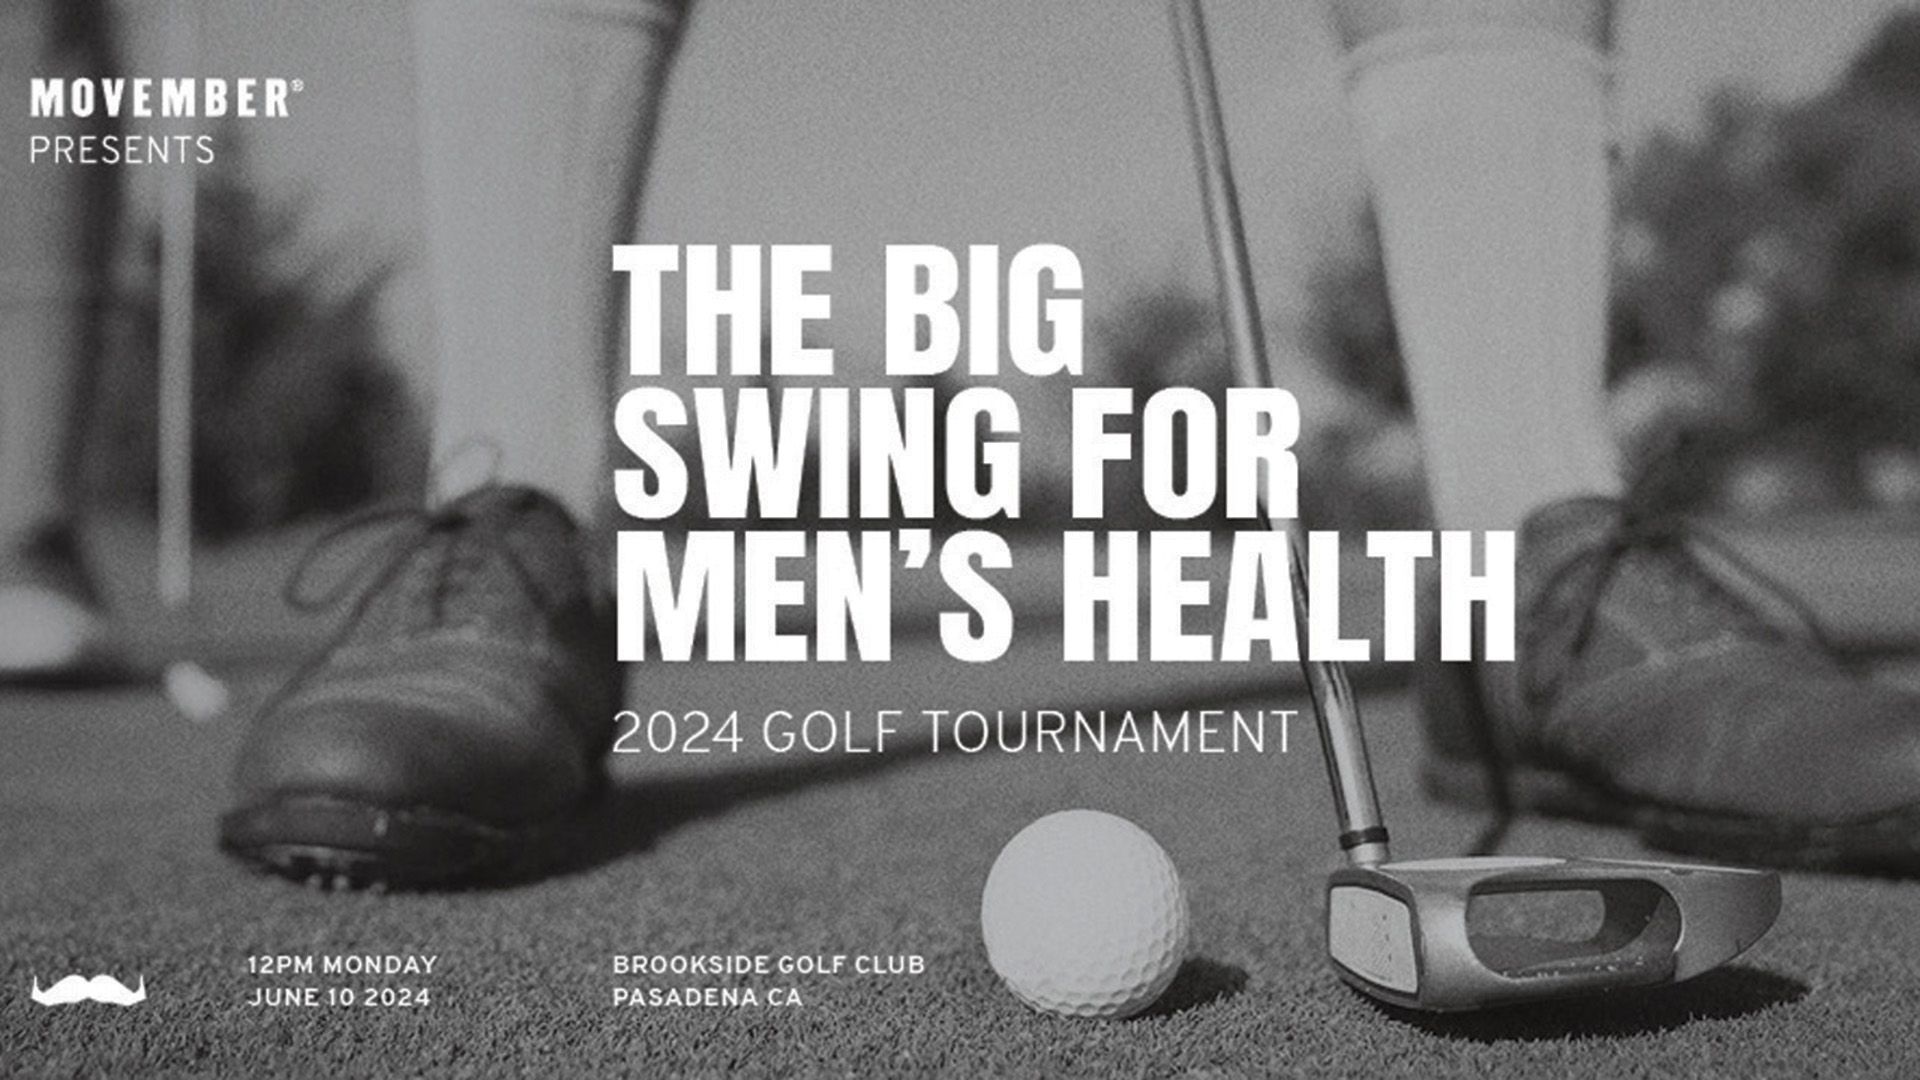 Black and white graphic promoting a Movember golfing event. It says: "The Big Swing for Men's Health. 2024 Golf Tournament."